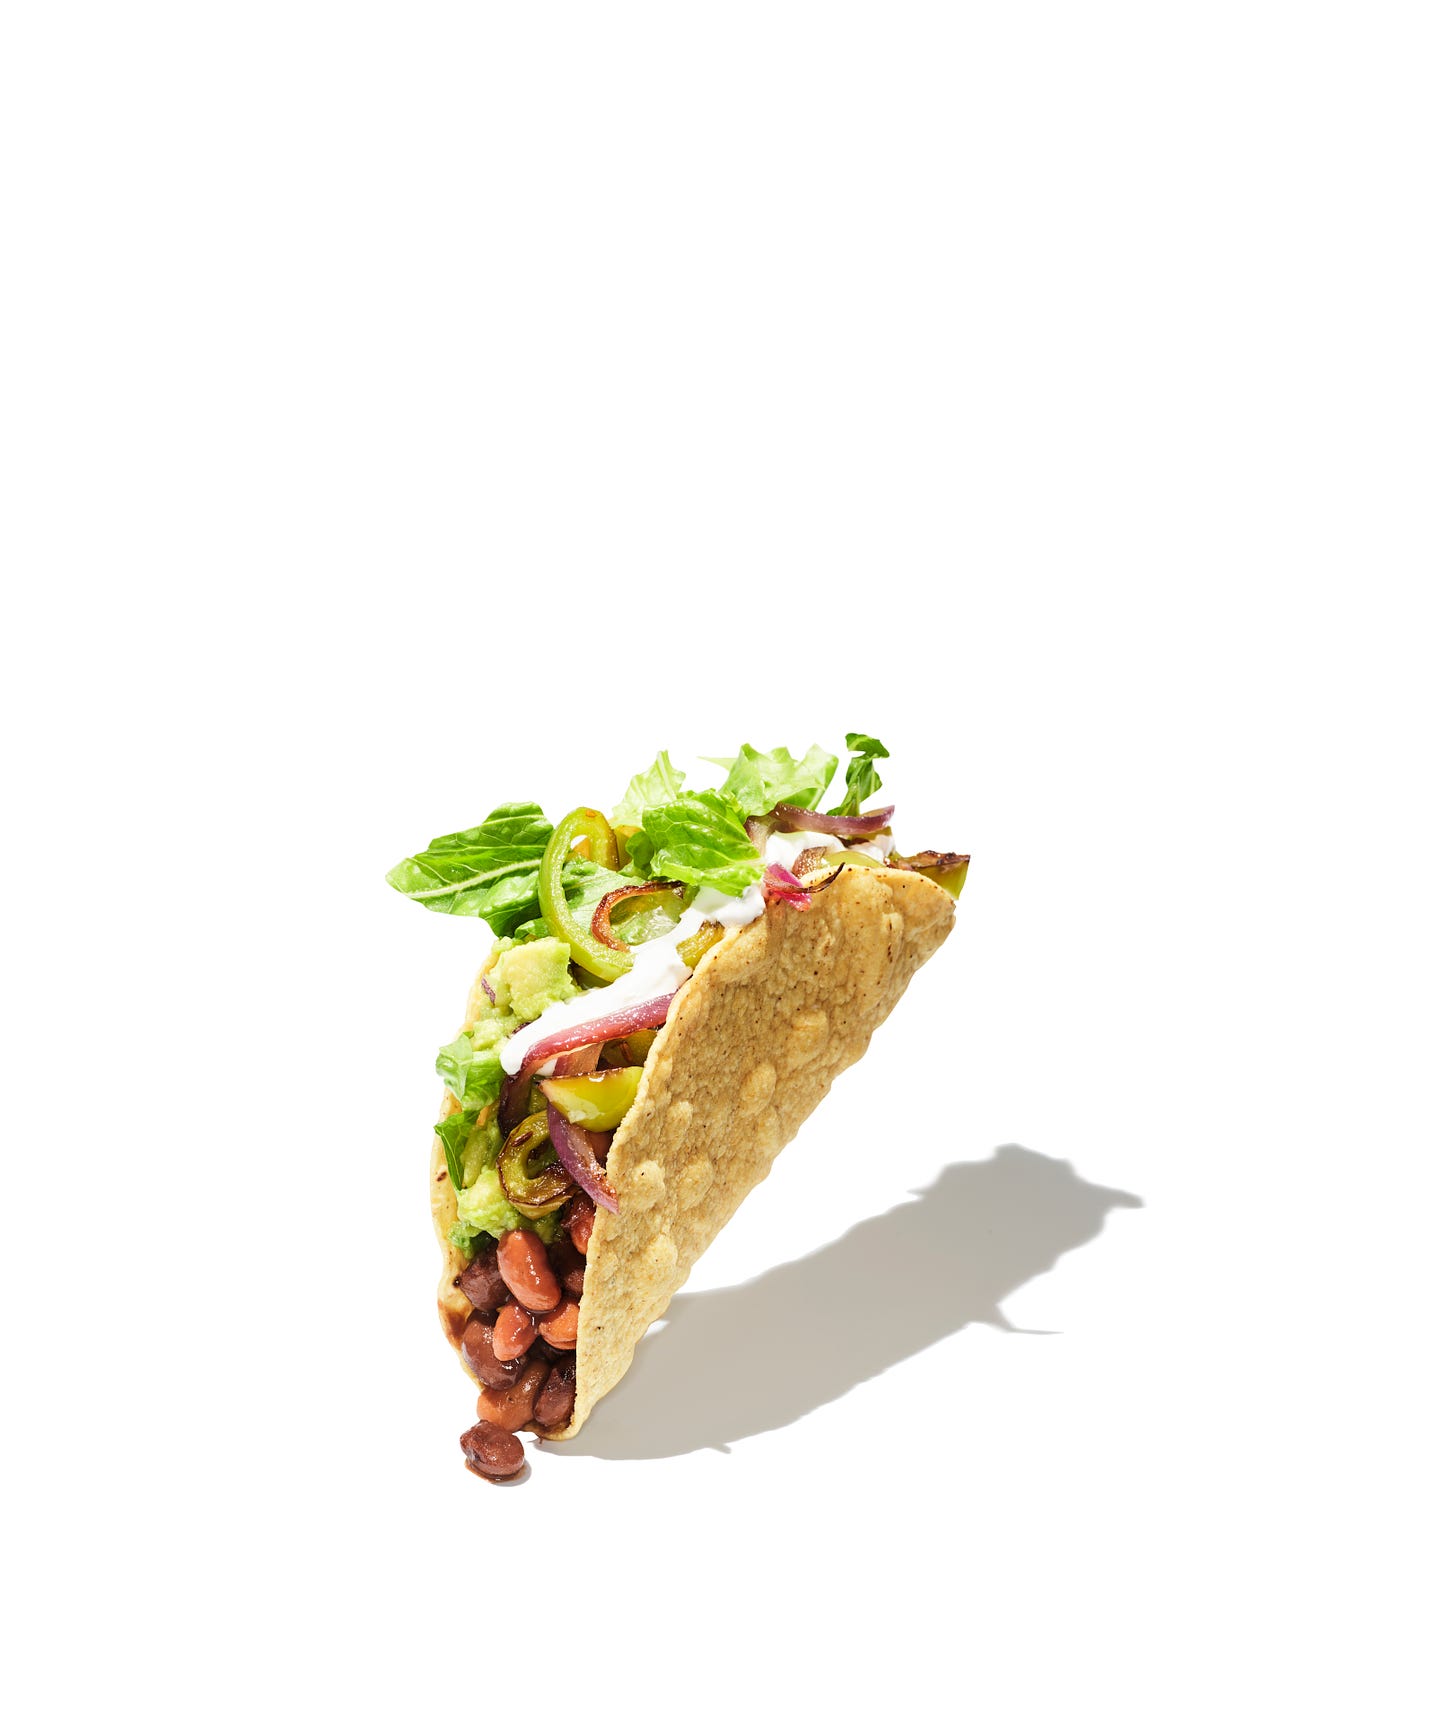 A bean and veggie puffy taco hovering on one corner,  obviously staged and stylized